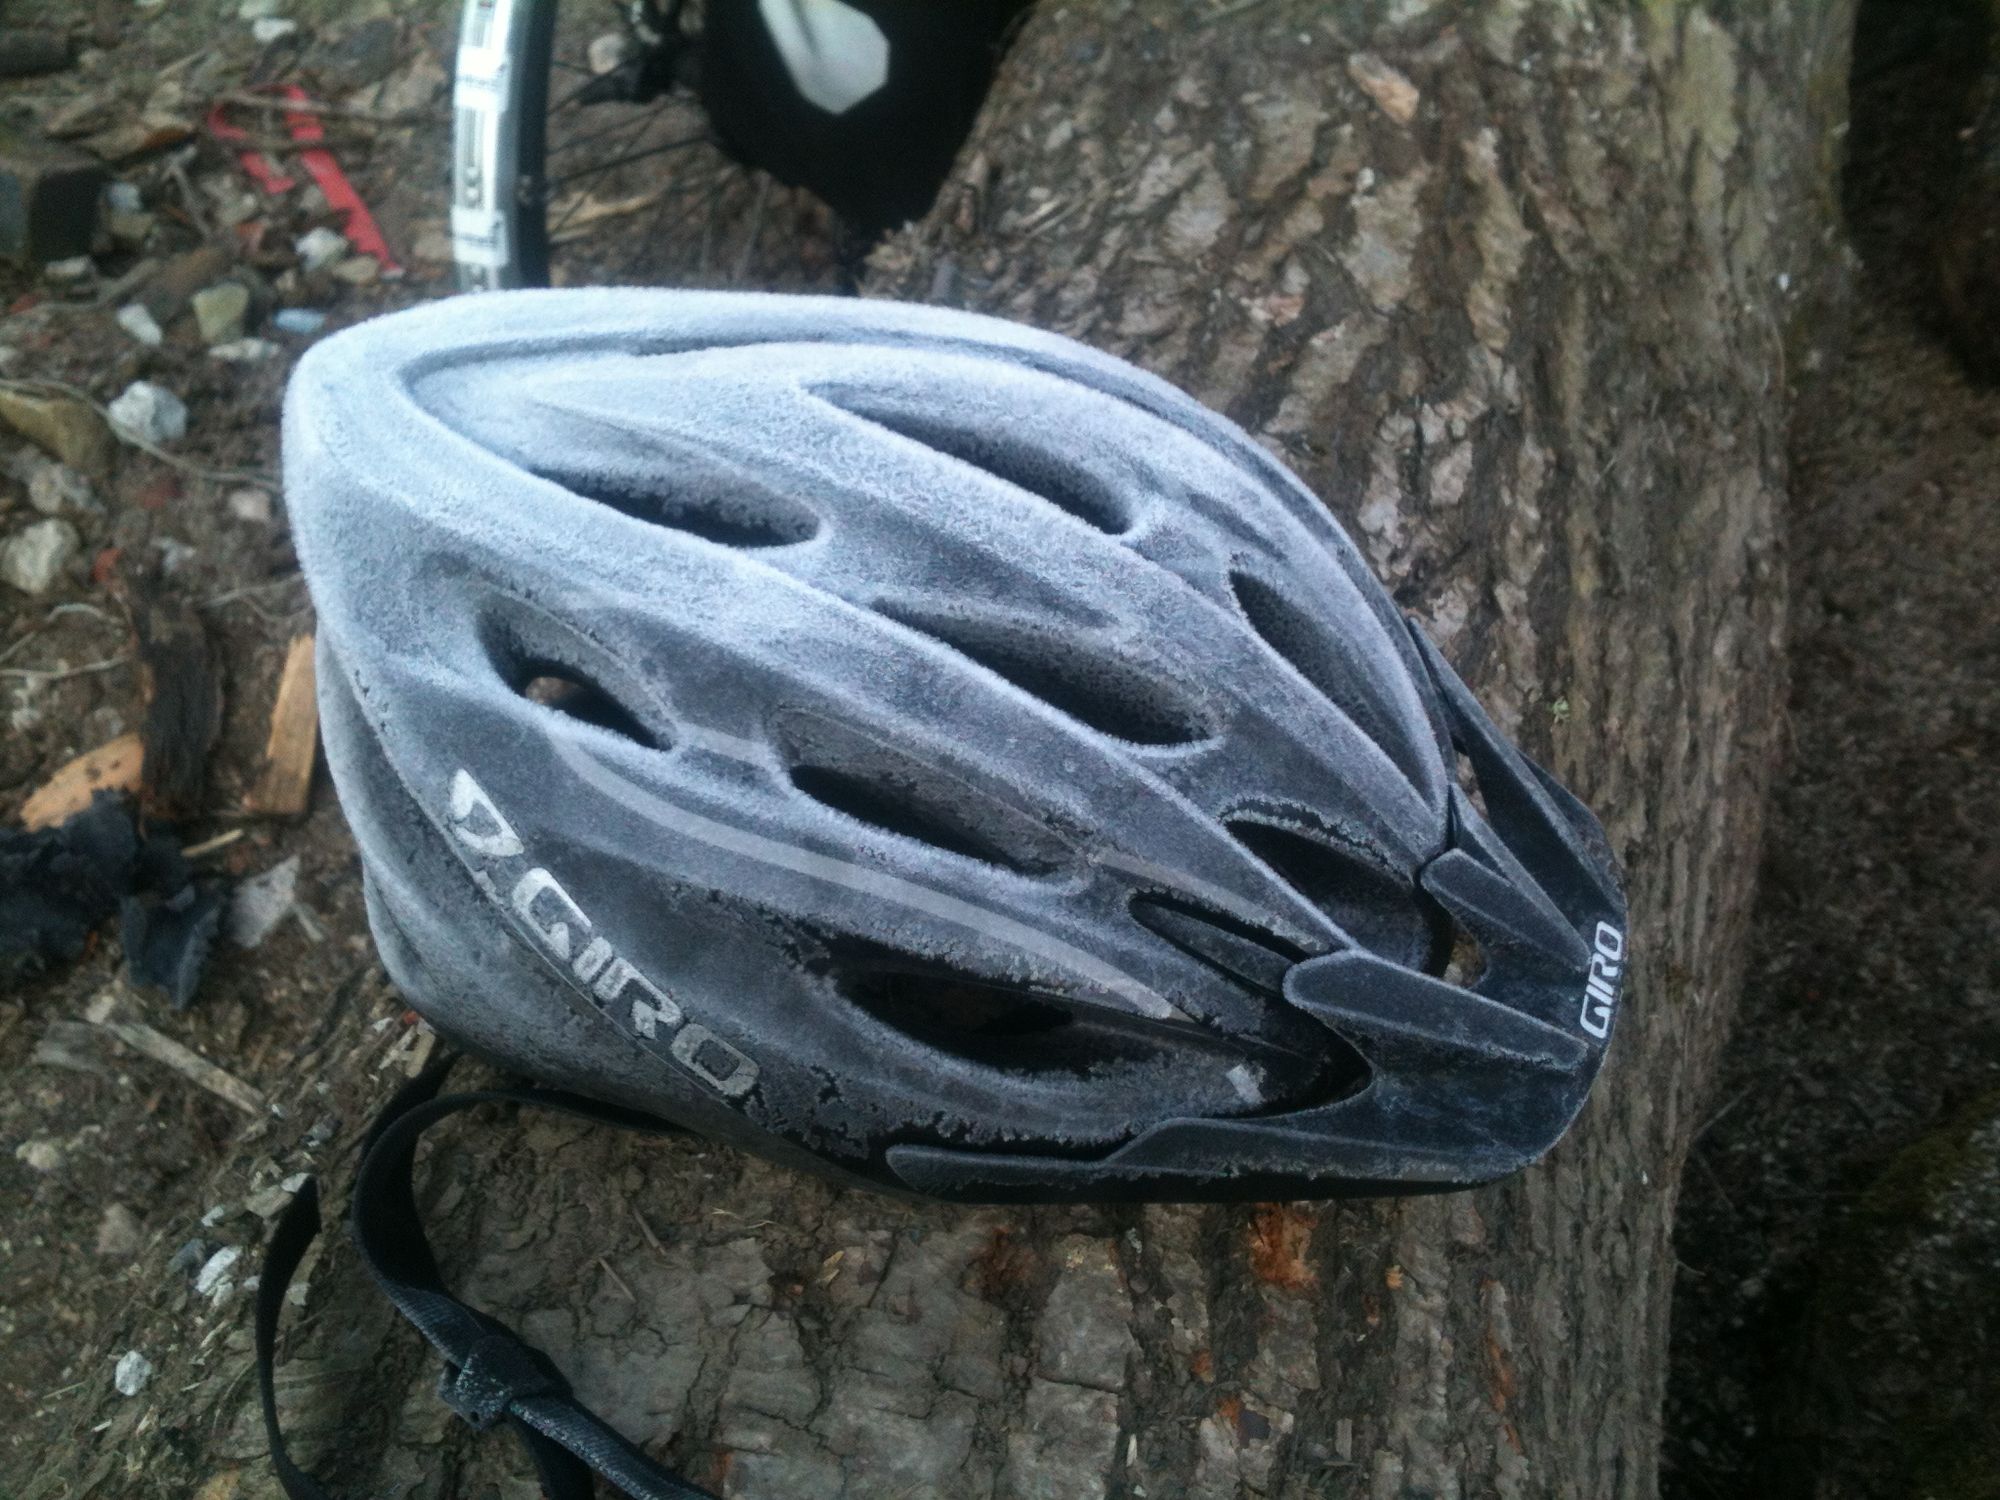 A frosted helmet in the morning before leaving Offshoots